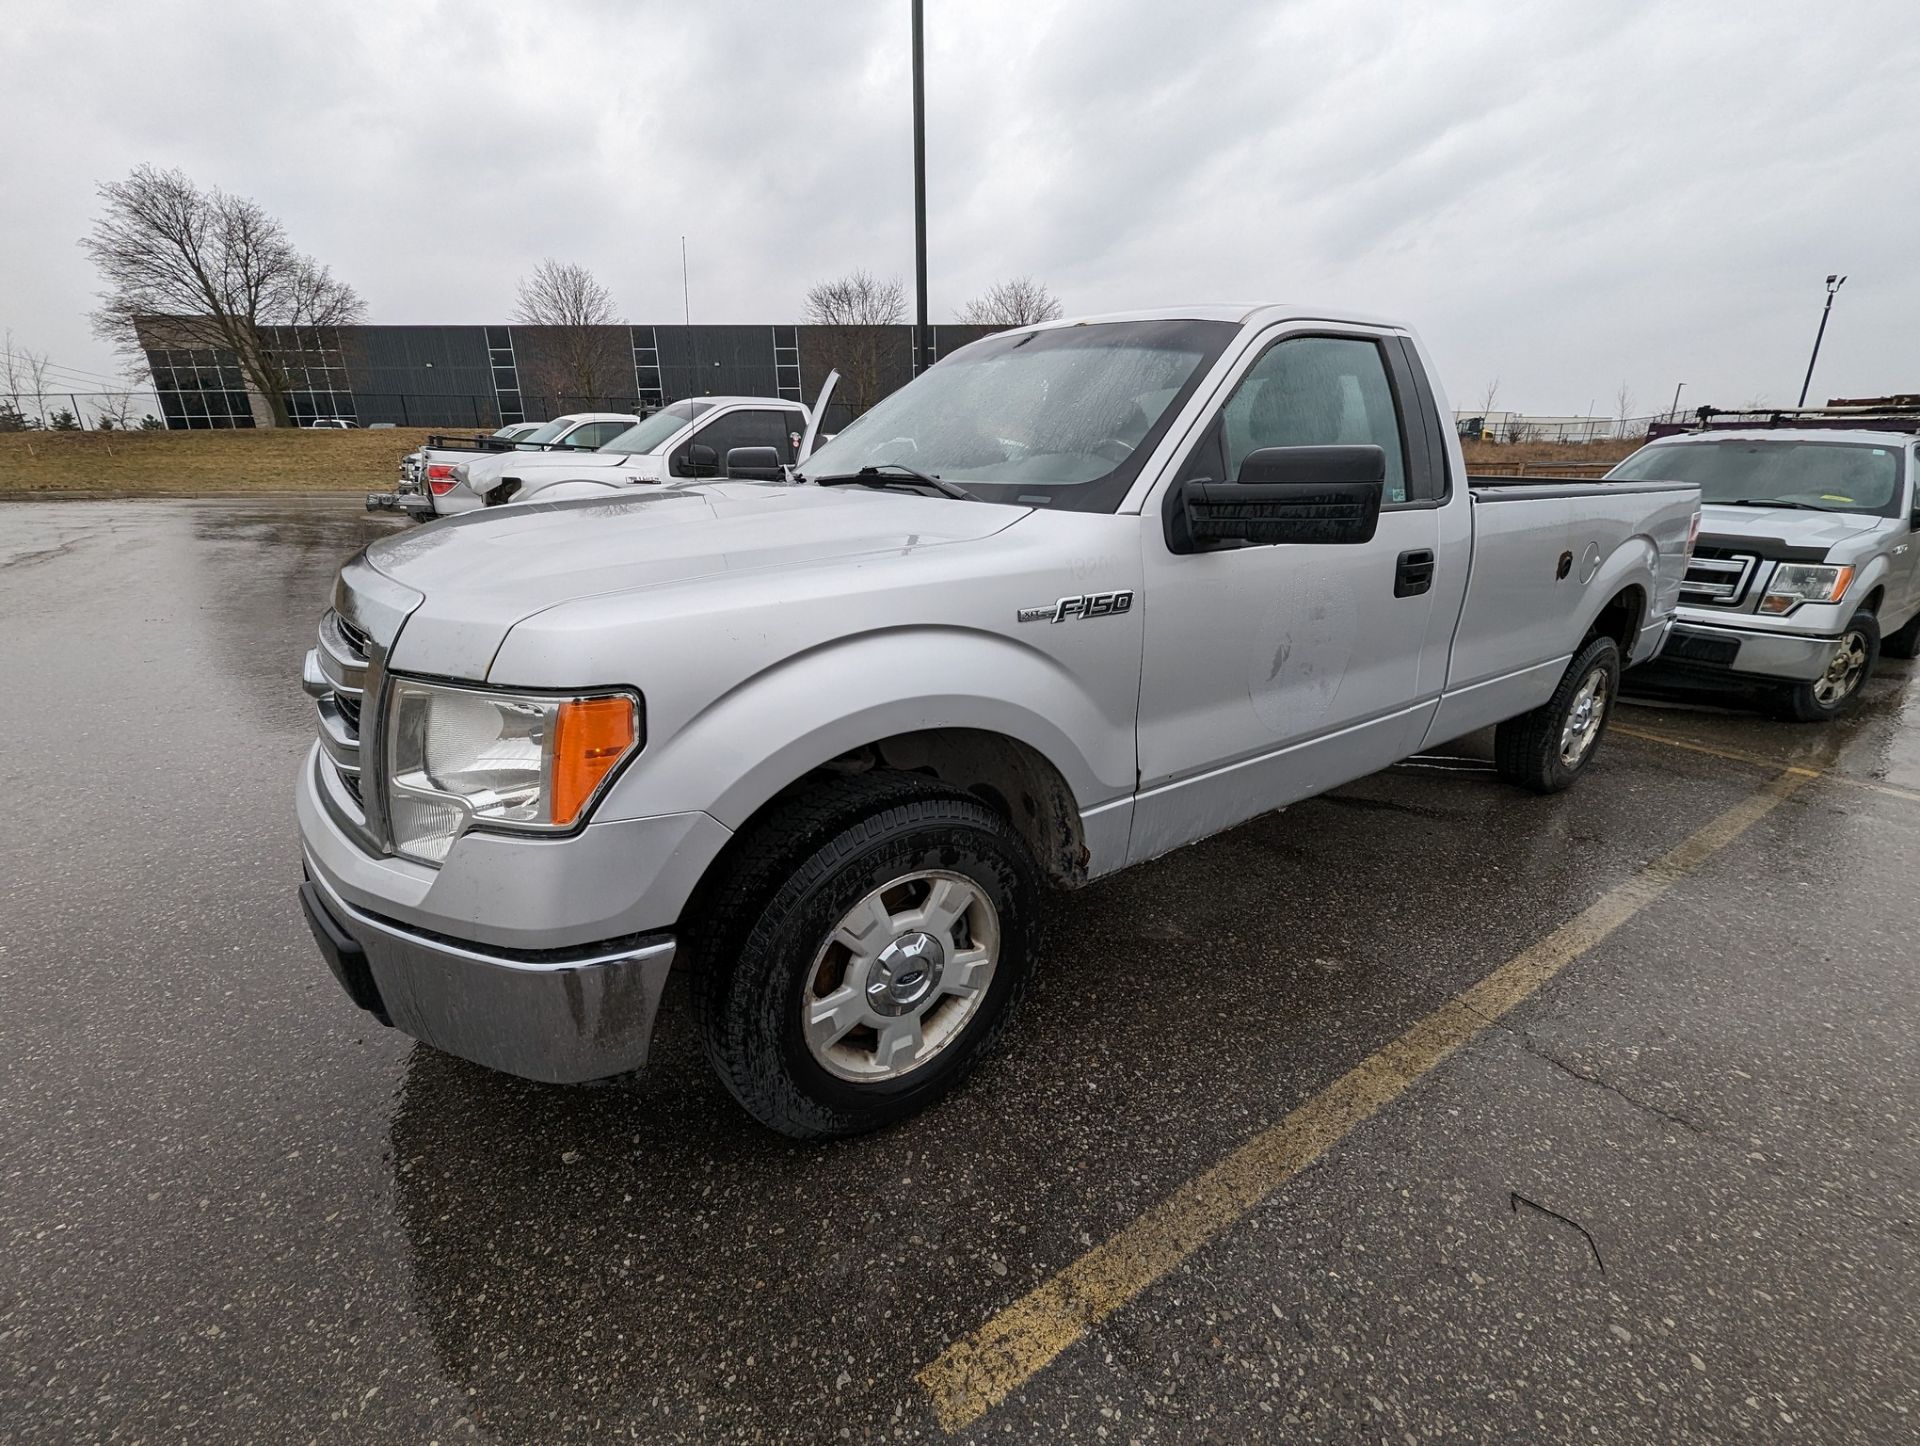 2013 FORD F150 XLT PICKUP TRUCK, VIN# 1FTNF1CFXDKF50570, APPROX. 423,552KMS (NO BLACK TOOL BOXES)